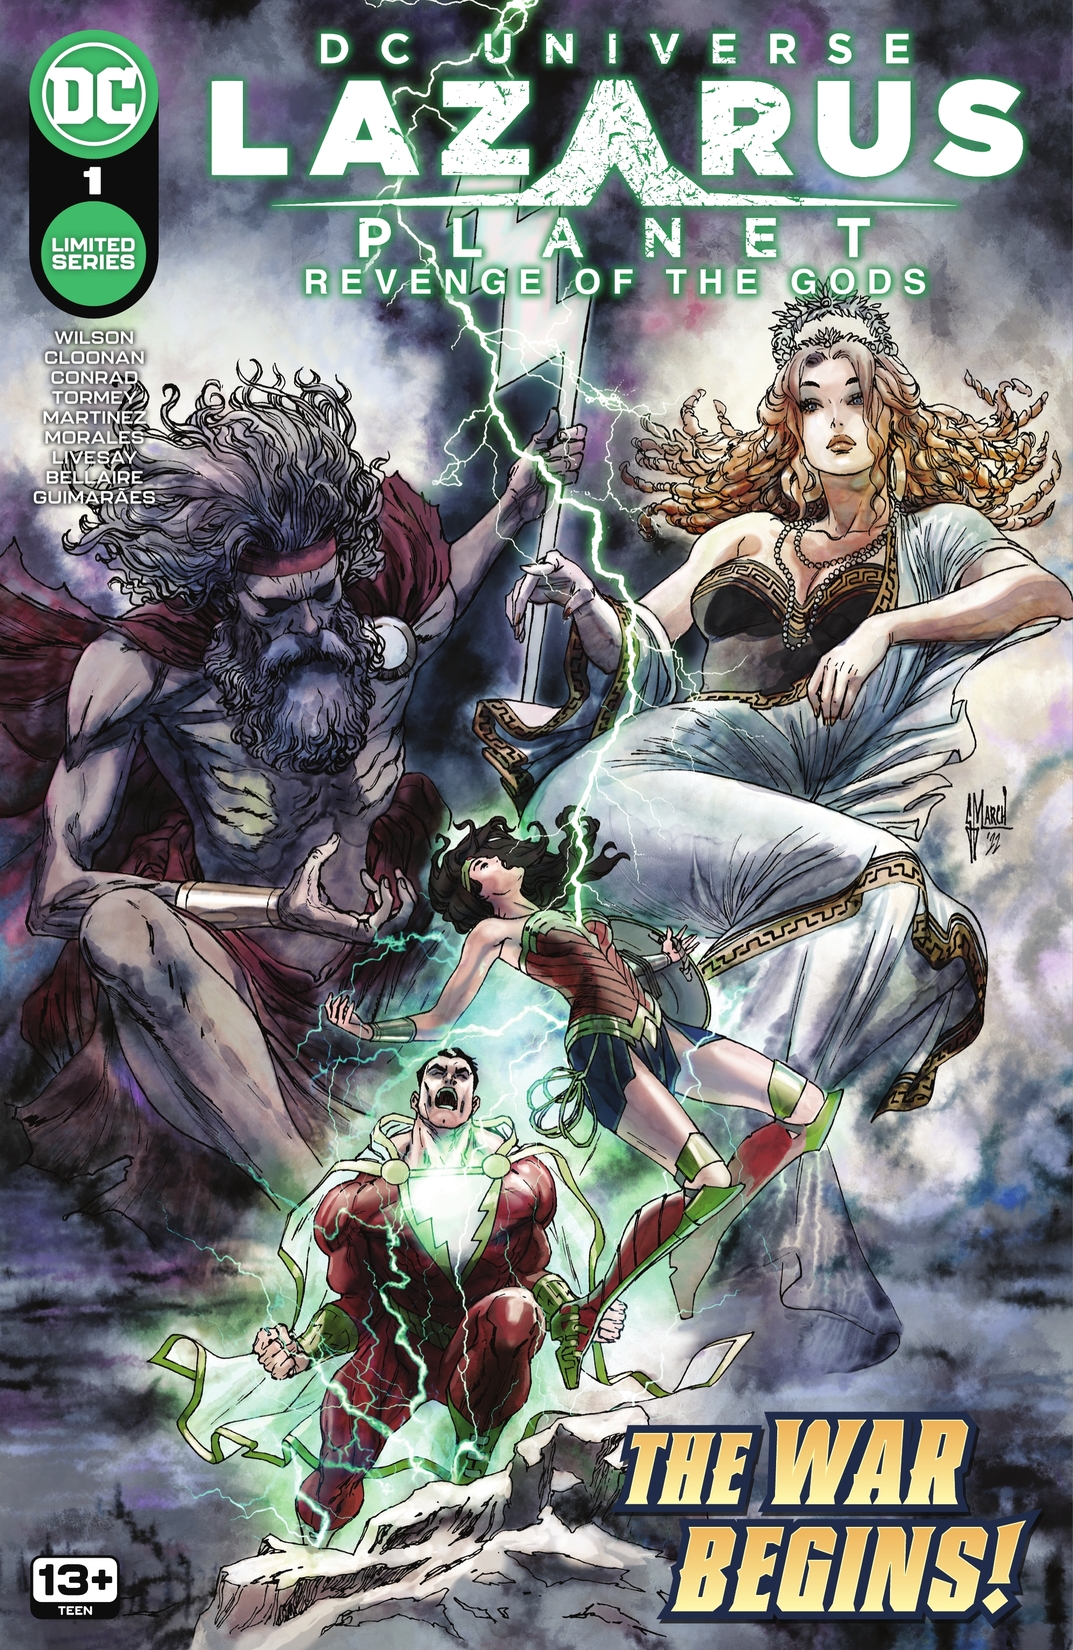 Lazarus Planet: Revenge of the Gods #1 preview images